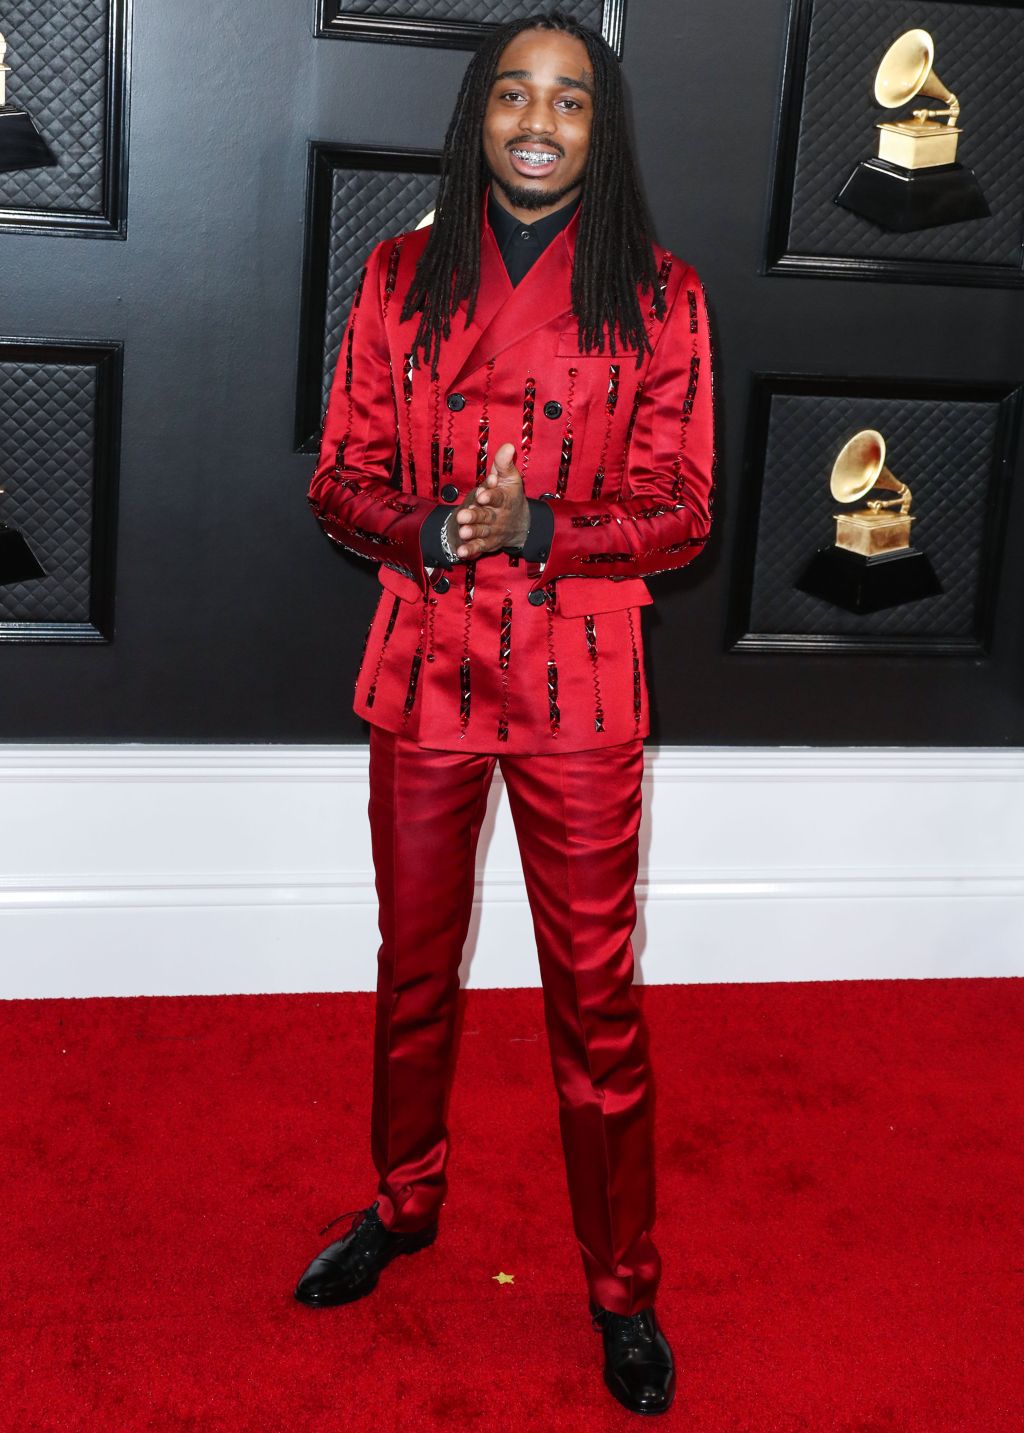 Quavo arrives at the 62nd Annual GRAMMY Awards held at Staples Center on January 26, 2020 in Los Angeles, California, United States.